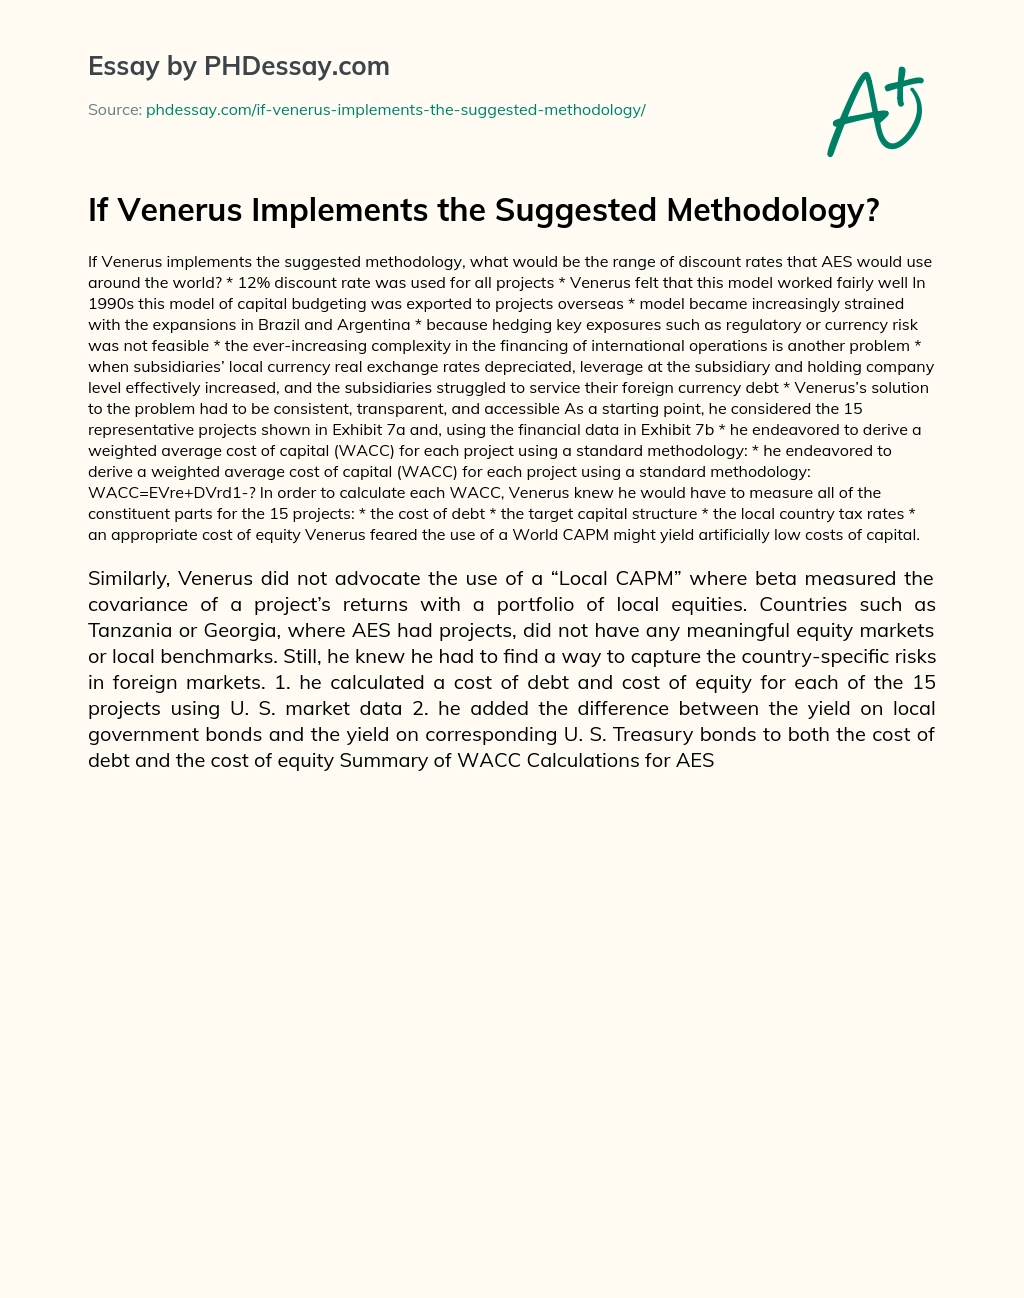 If Venerus Implements the Suggested Methodology? essay